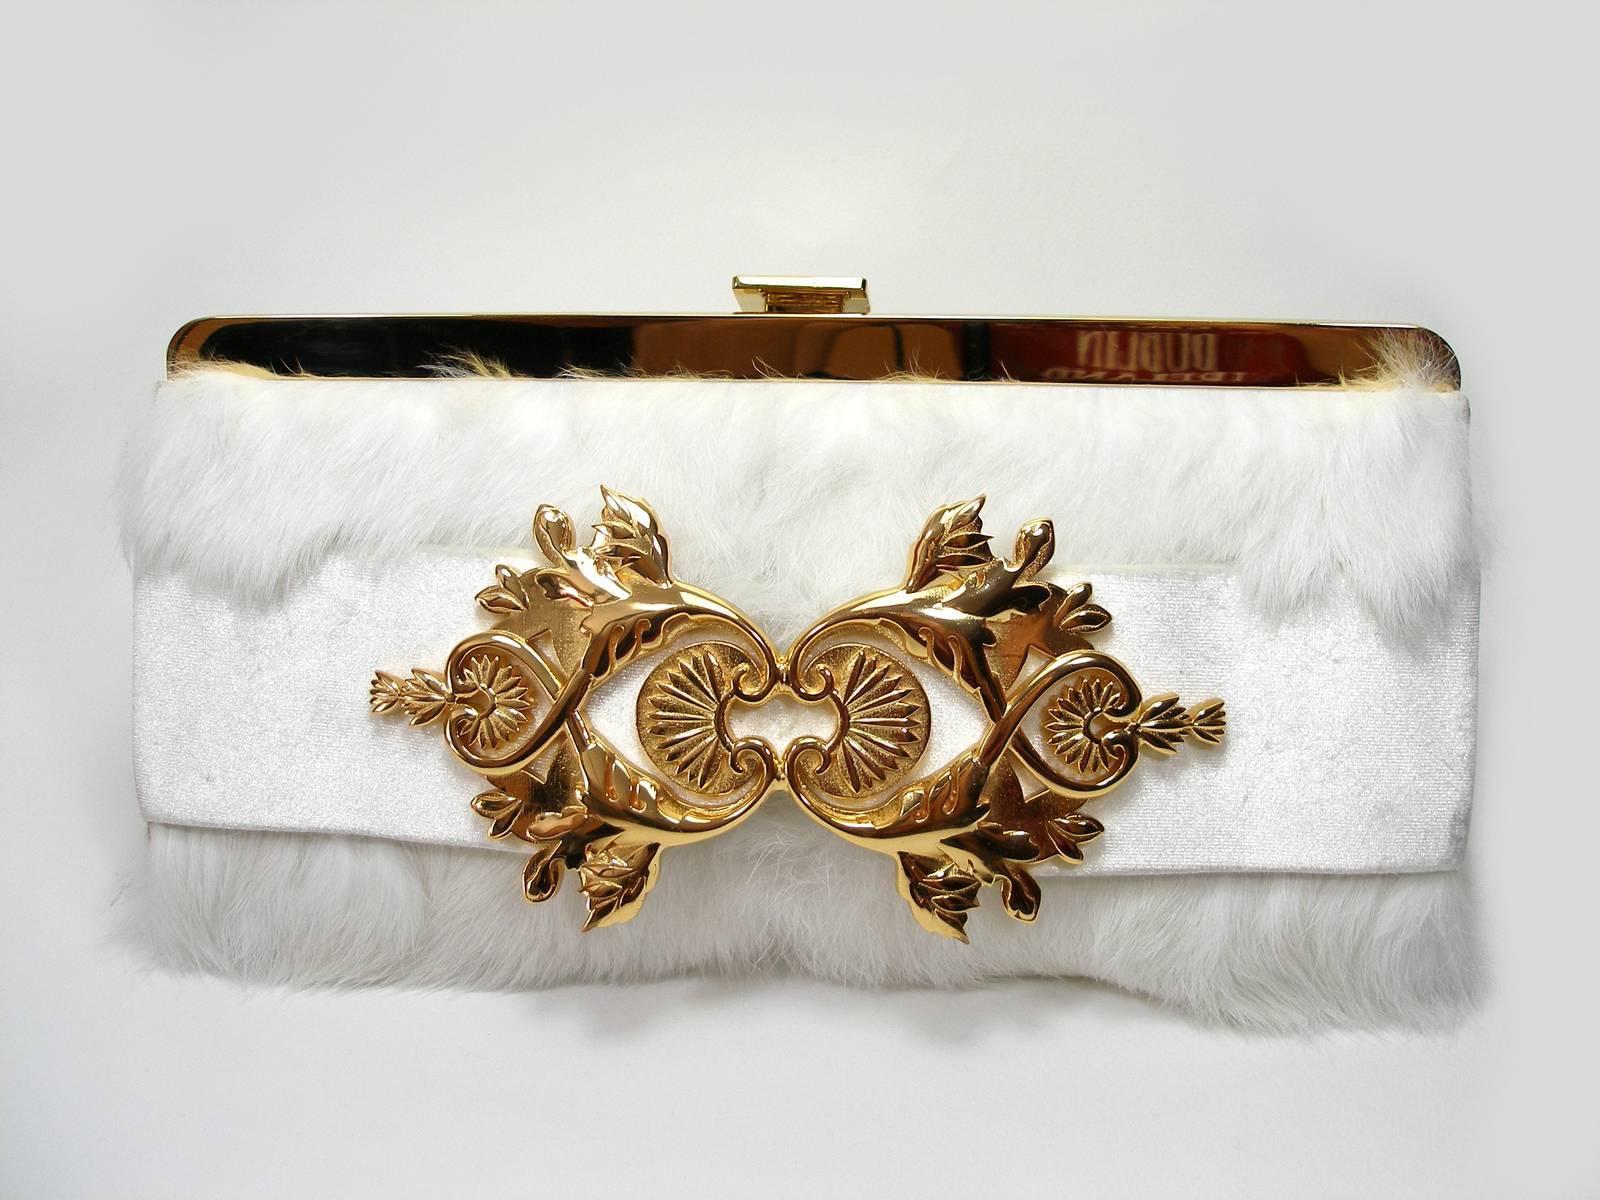 Wonderful Balmain Clutch Baroque Style
Authentic fur 
White and gold hardware
Signature inside
Please note : NO strap for this clutch. You can adapt a shoulder strap.
Dimensions : 28 x 14 x 5 cm  approximate 
No dustbag / no box 
